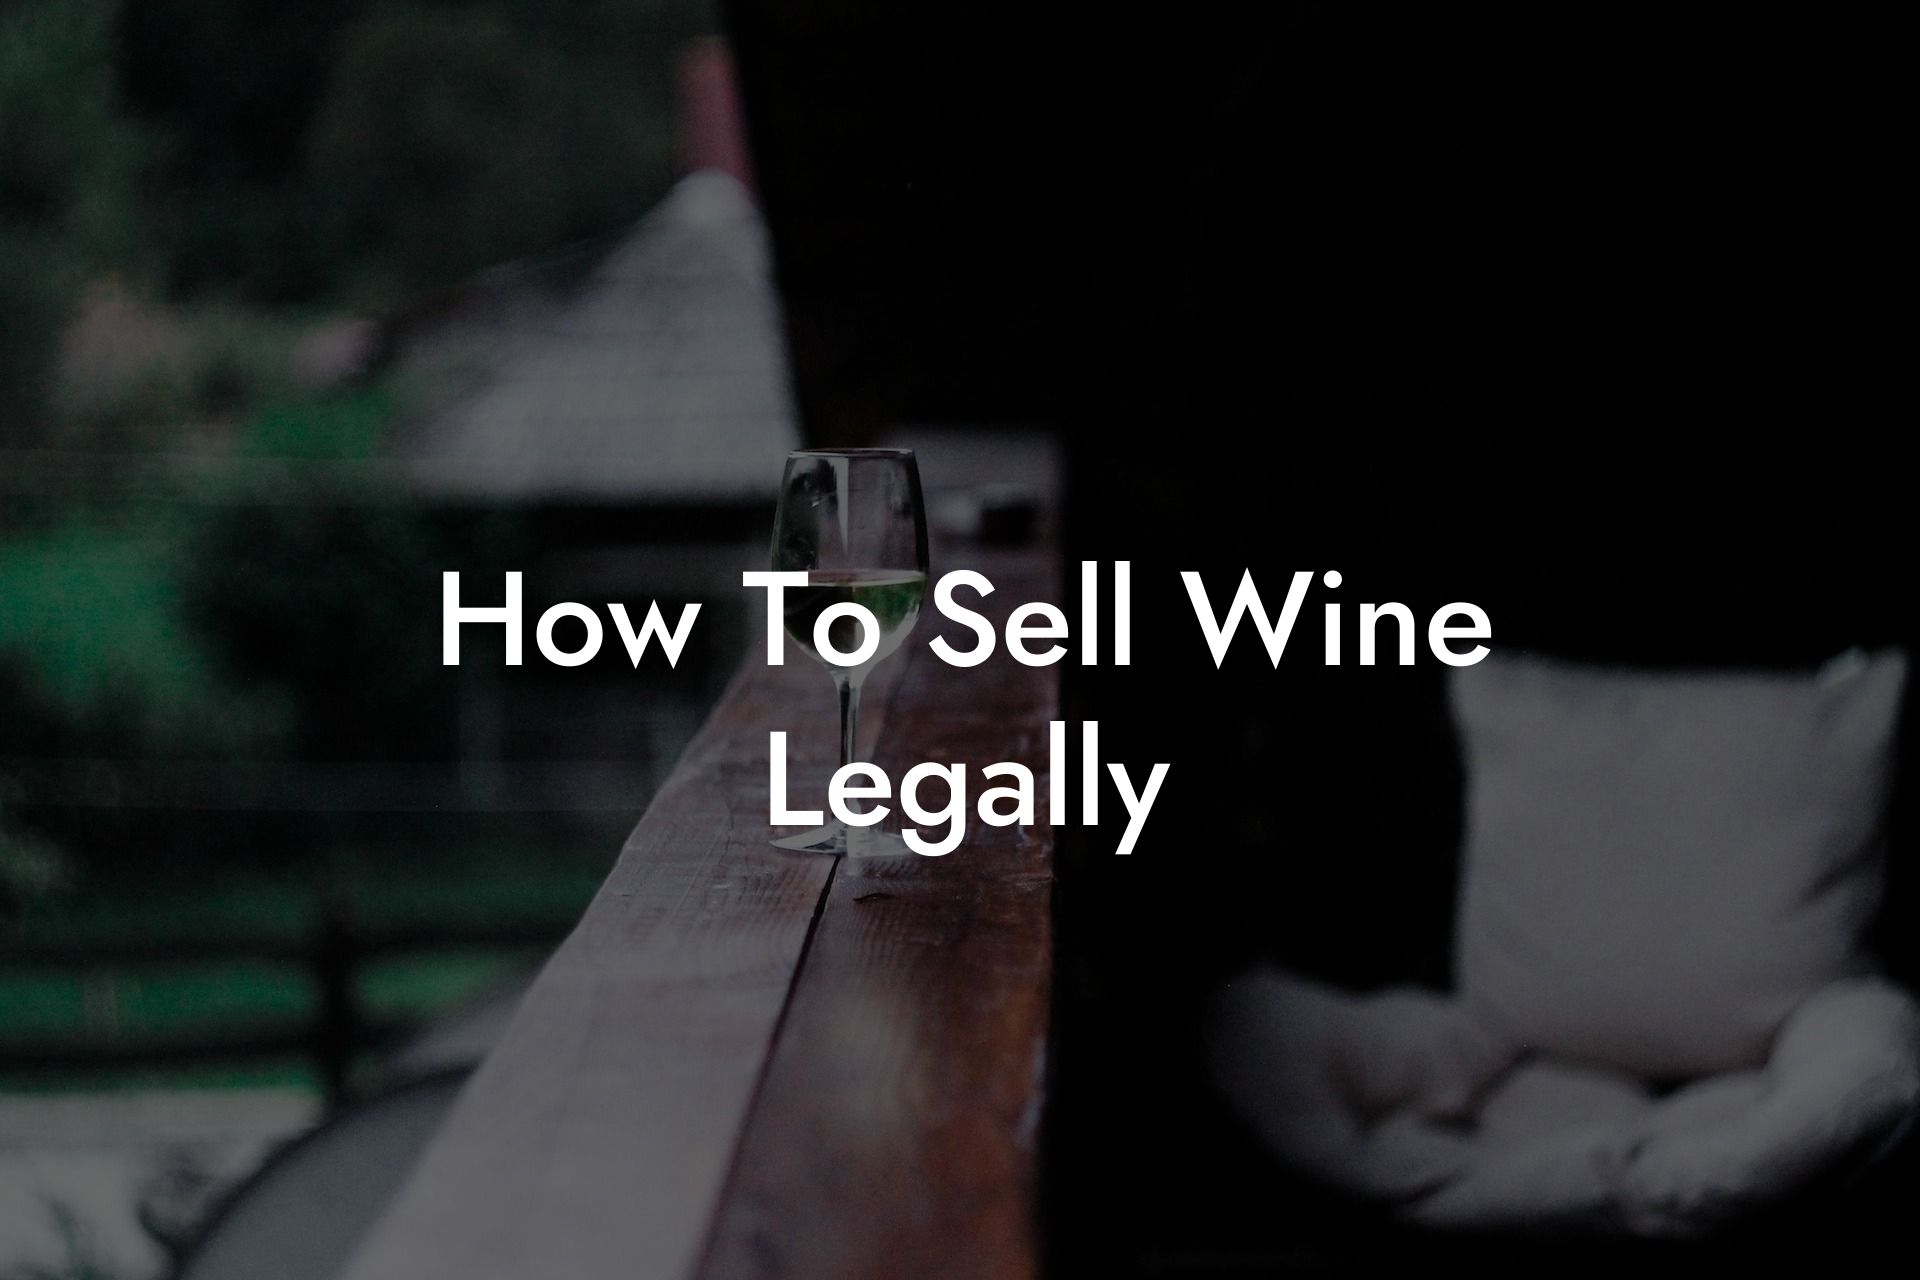 How To Sell Wine Legally